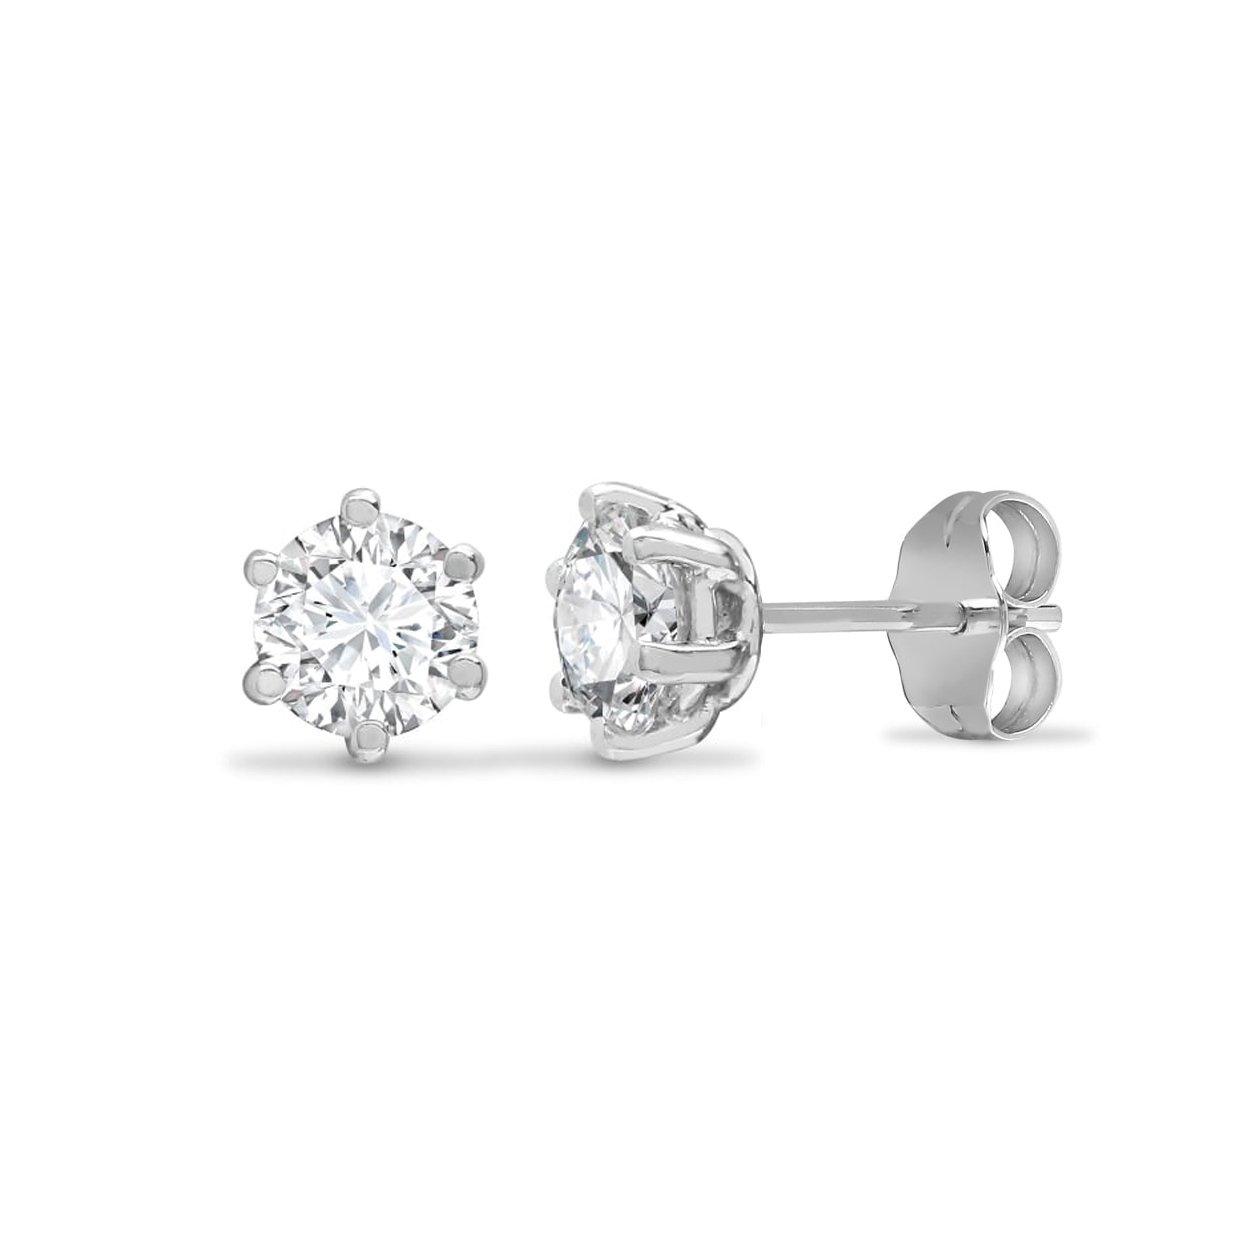 9ct White Gold  CZ 6 Claw Solitaire Stud Earrings, 4mm - JES176